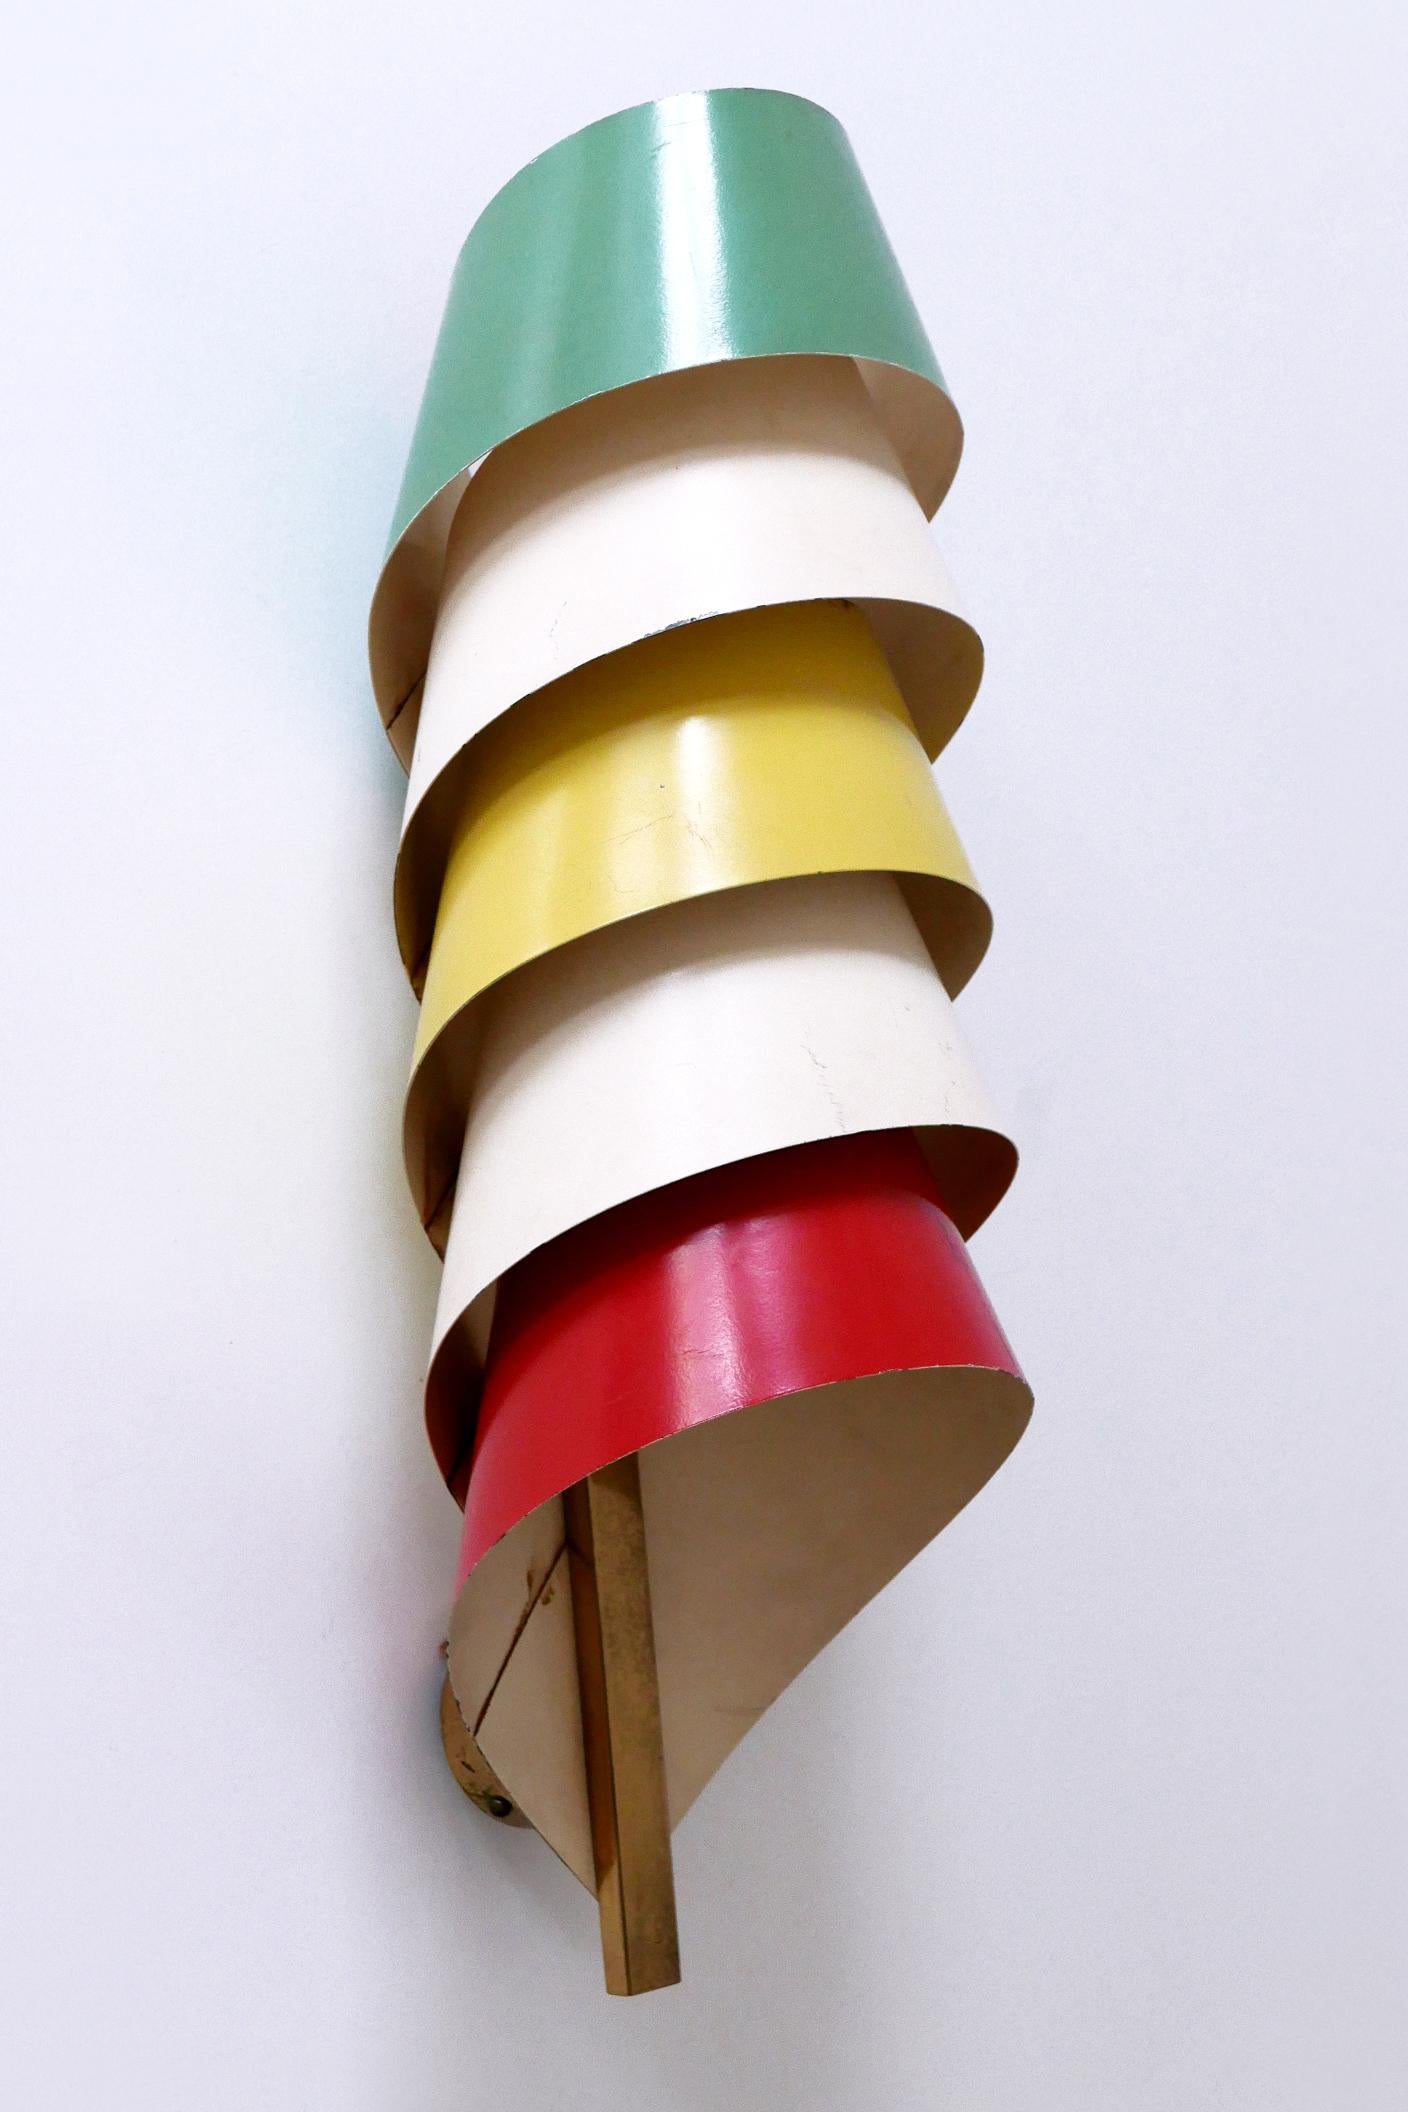 Rare & Decorative Mid-Century Modern Sconce or Wall Lamp Scandinavia 1950s In Good Condition For Sale In Munich, DE